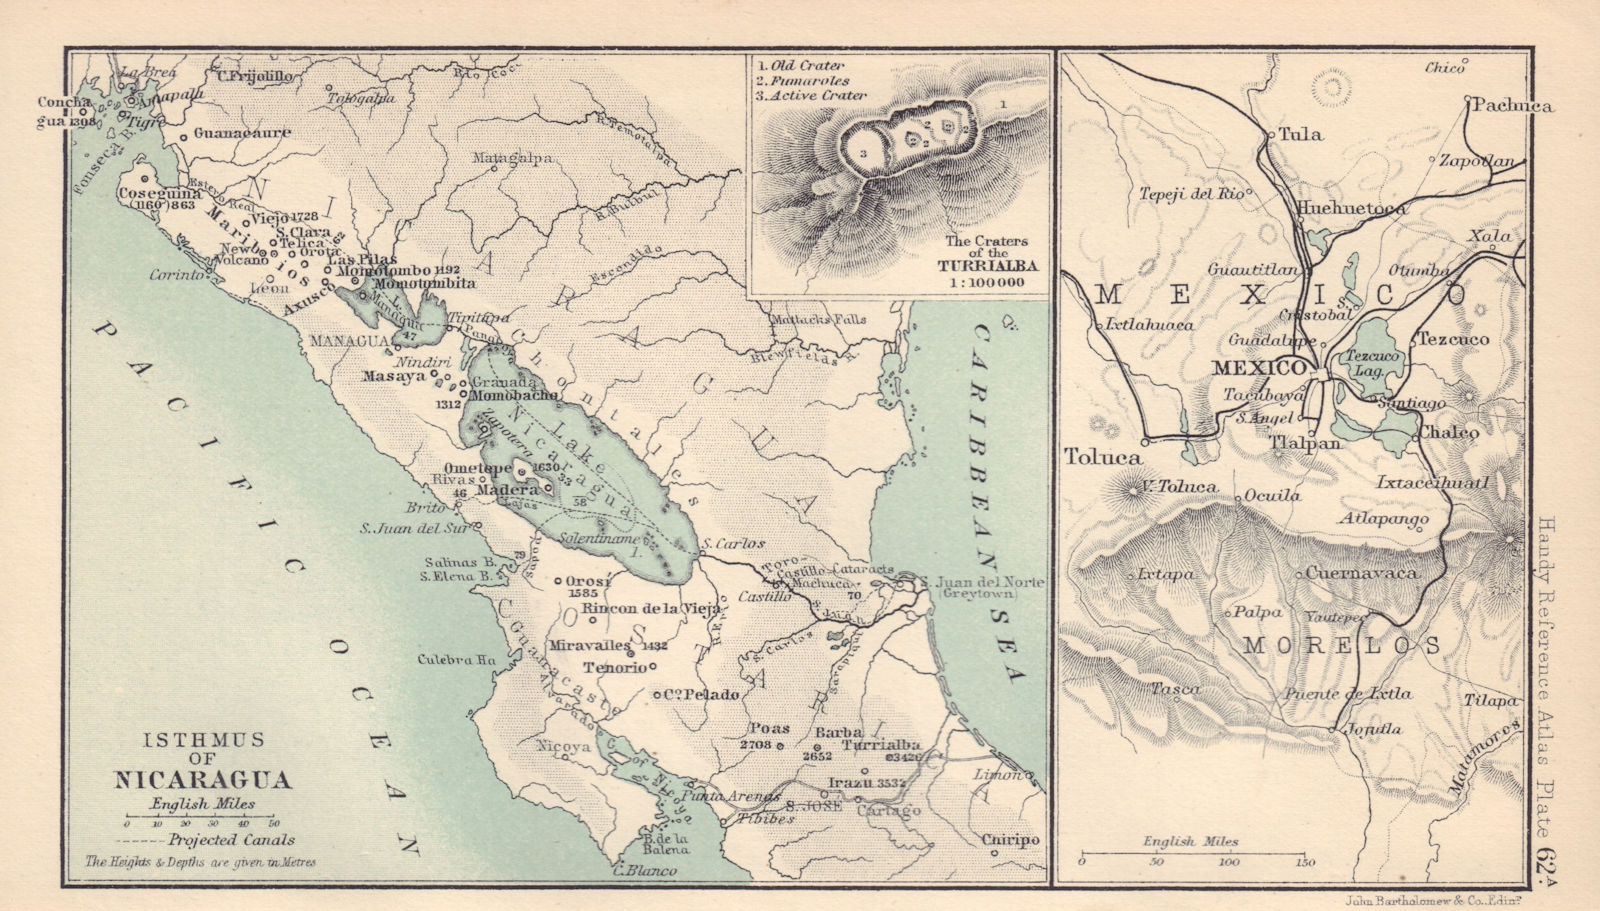 Isthmus of Nicaragua. Mexico City. Craters of the Turrialba 1898 old map